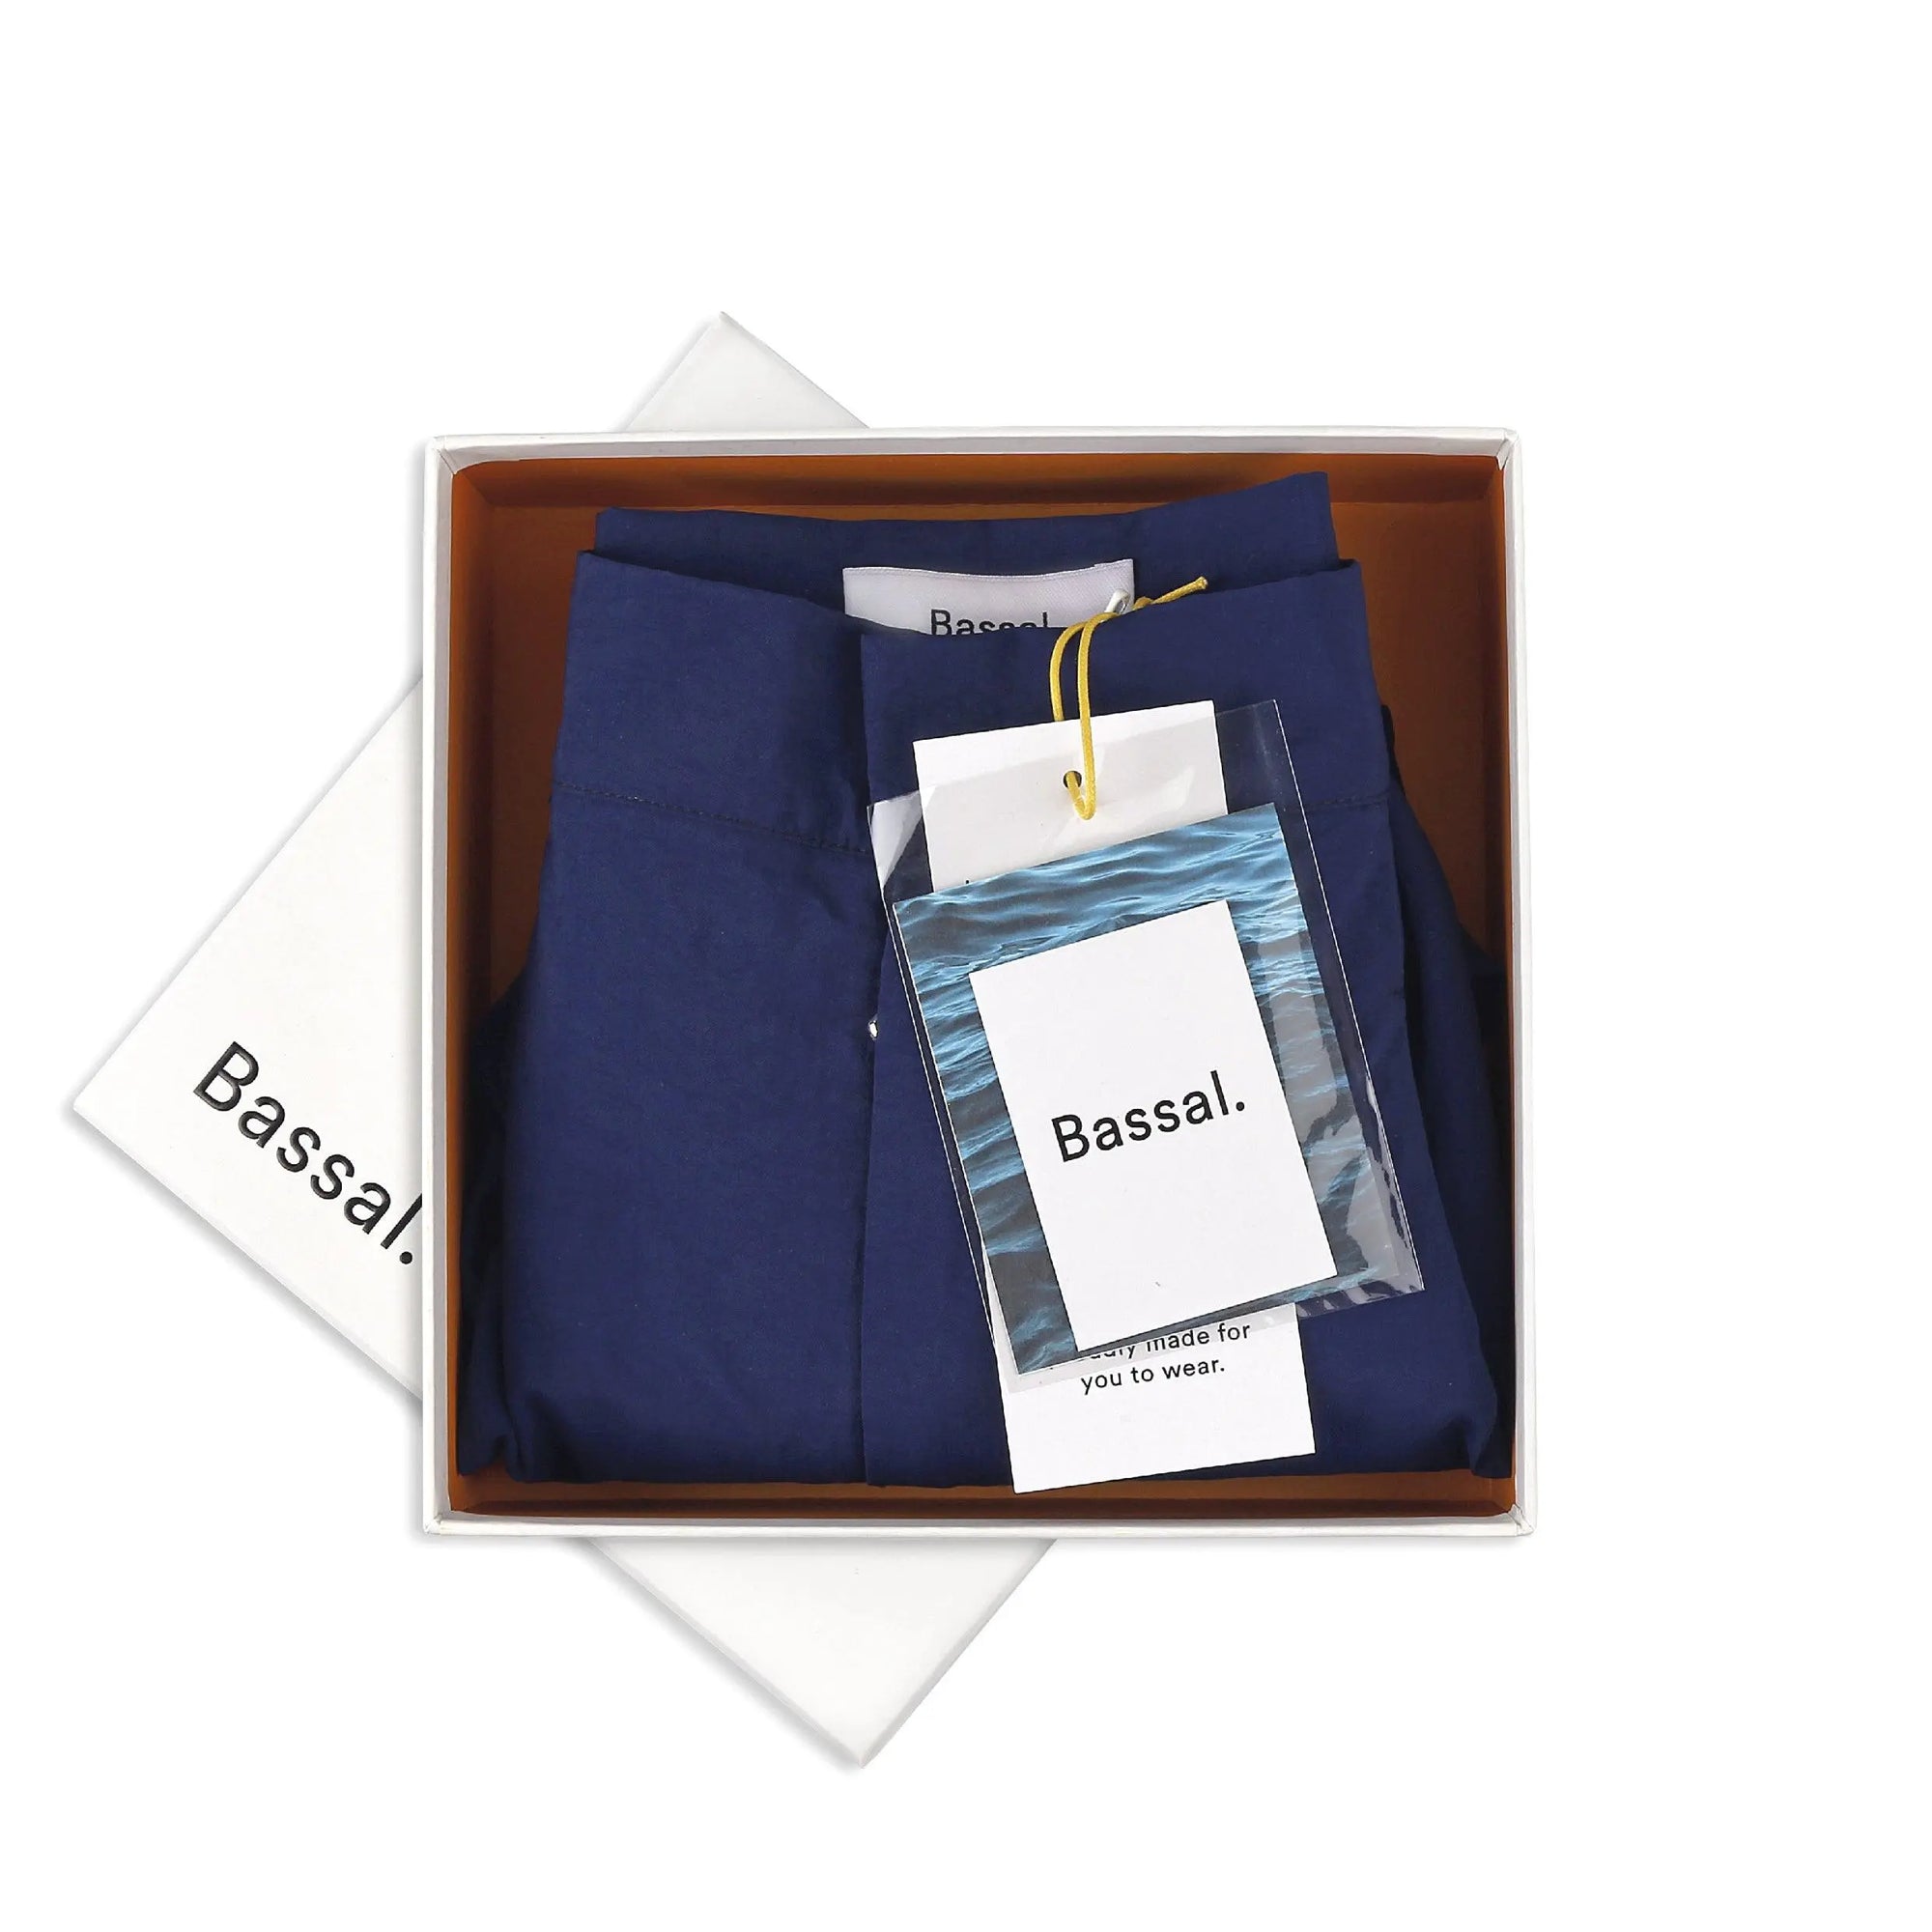 A neatly folded dark blue bermuda swimwear is placed in a white box with a brown interior. The box lid, slightly off to the side, and a tag on the swimwear both feature the brand name "Bassal." A small plastic packet is attached to the tag. Discover this elegant piece exclusively at BassalStore, your go-to for Barcelona style.